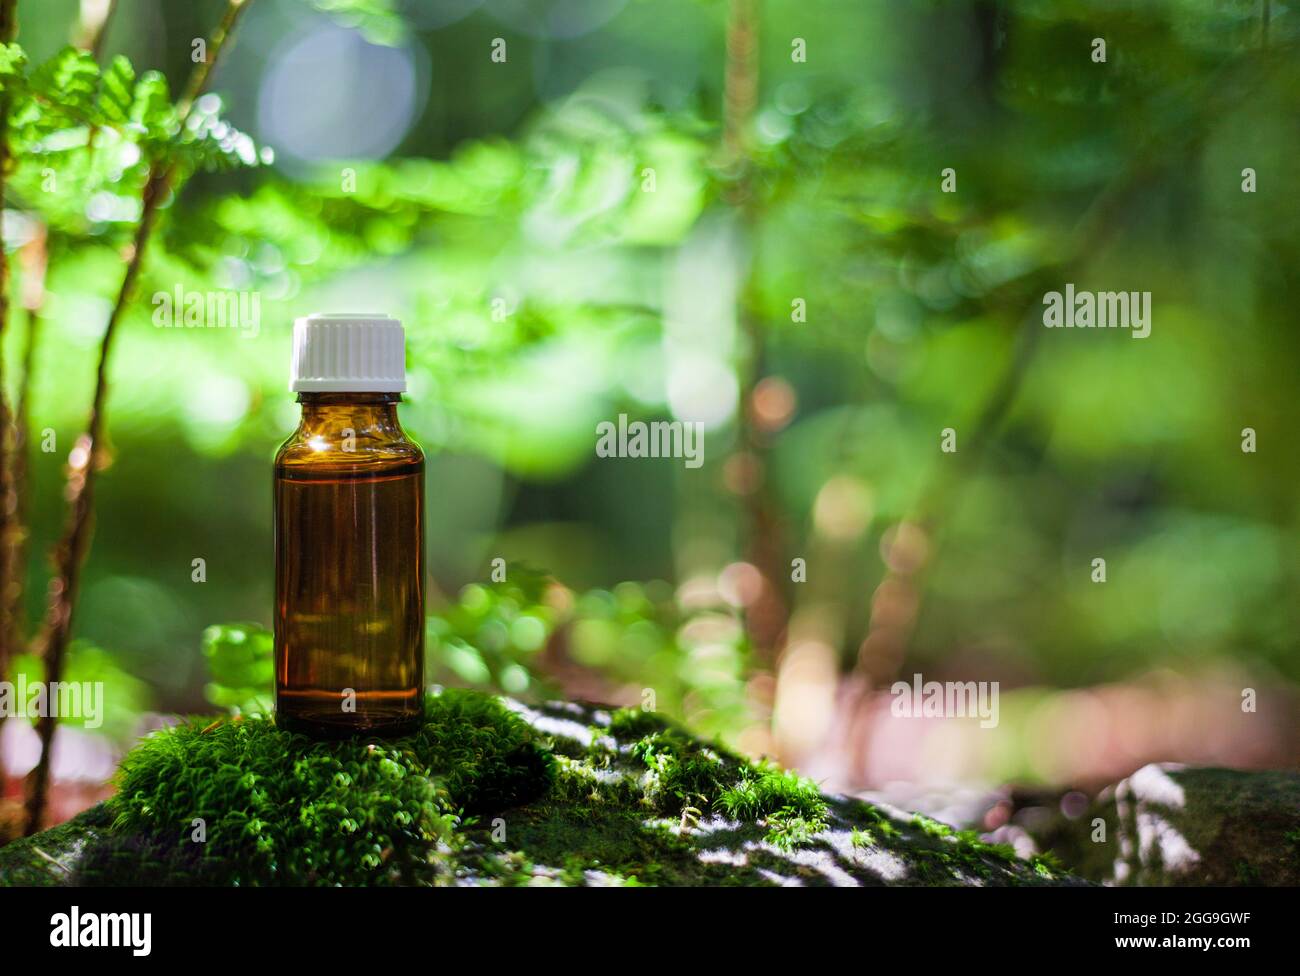 Herb extract, oil in a bottle on moss. Nature bokeh background provides copy space. Natural remedy. Blur natural green plant background. Selective foc Stock Photo